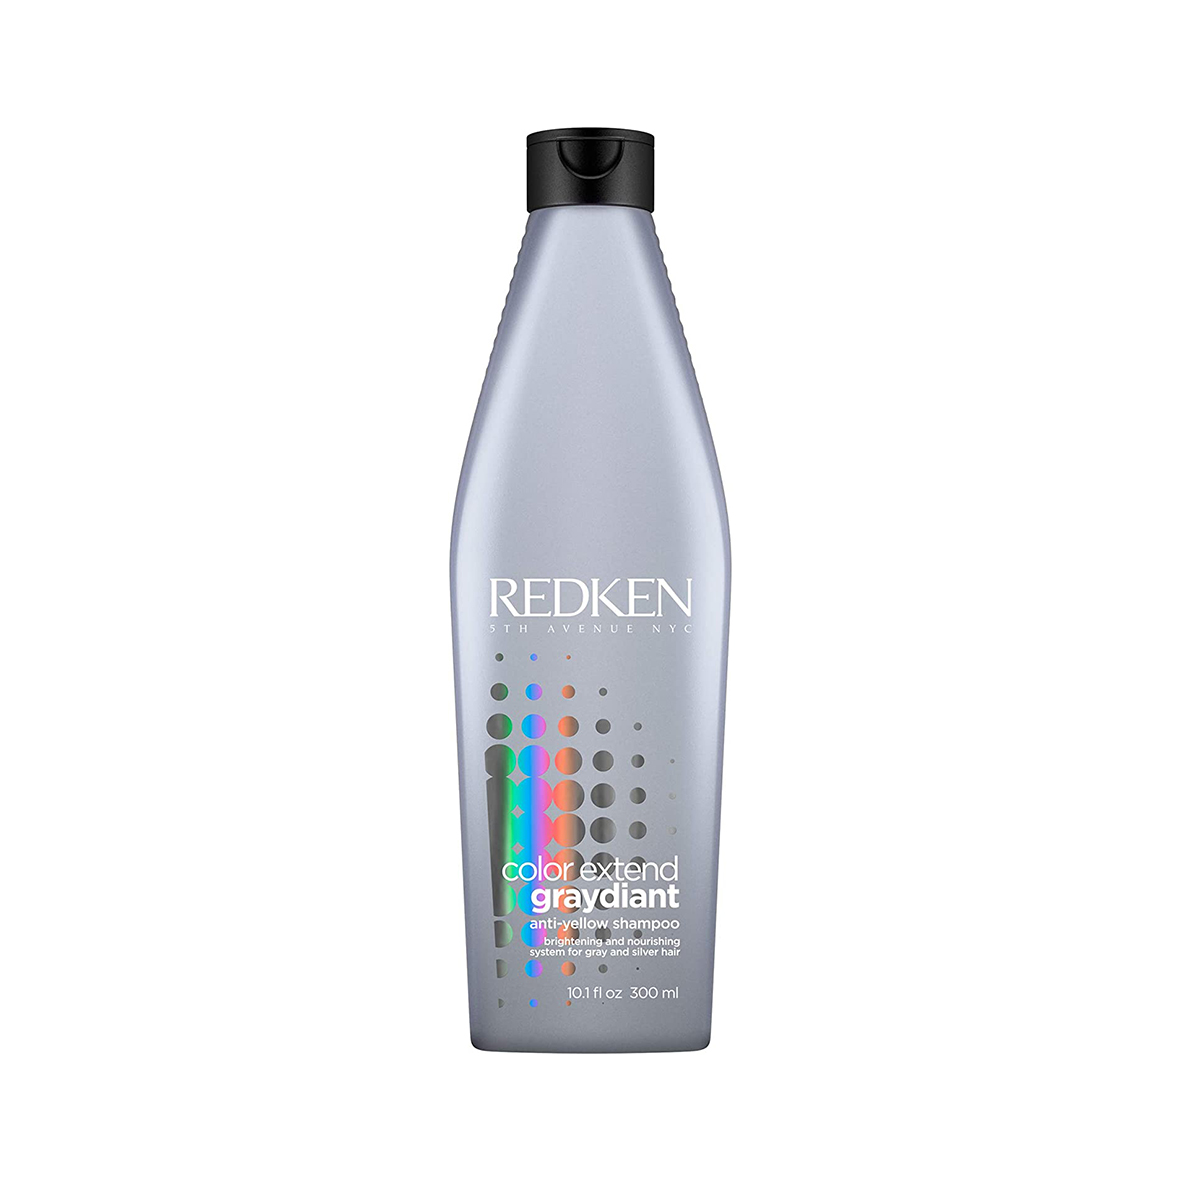 Redken 5th Avenue NYC Color Extend Graydiant